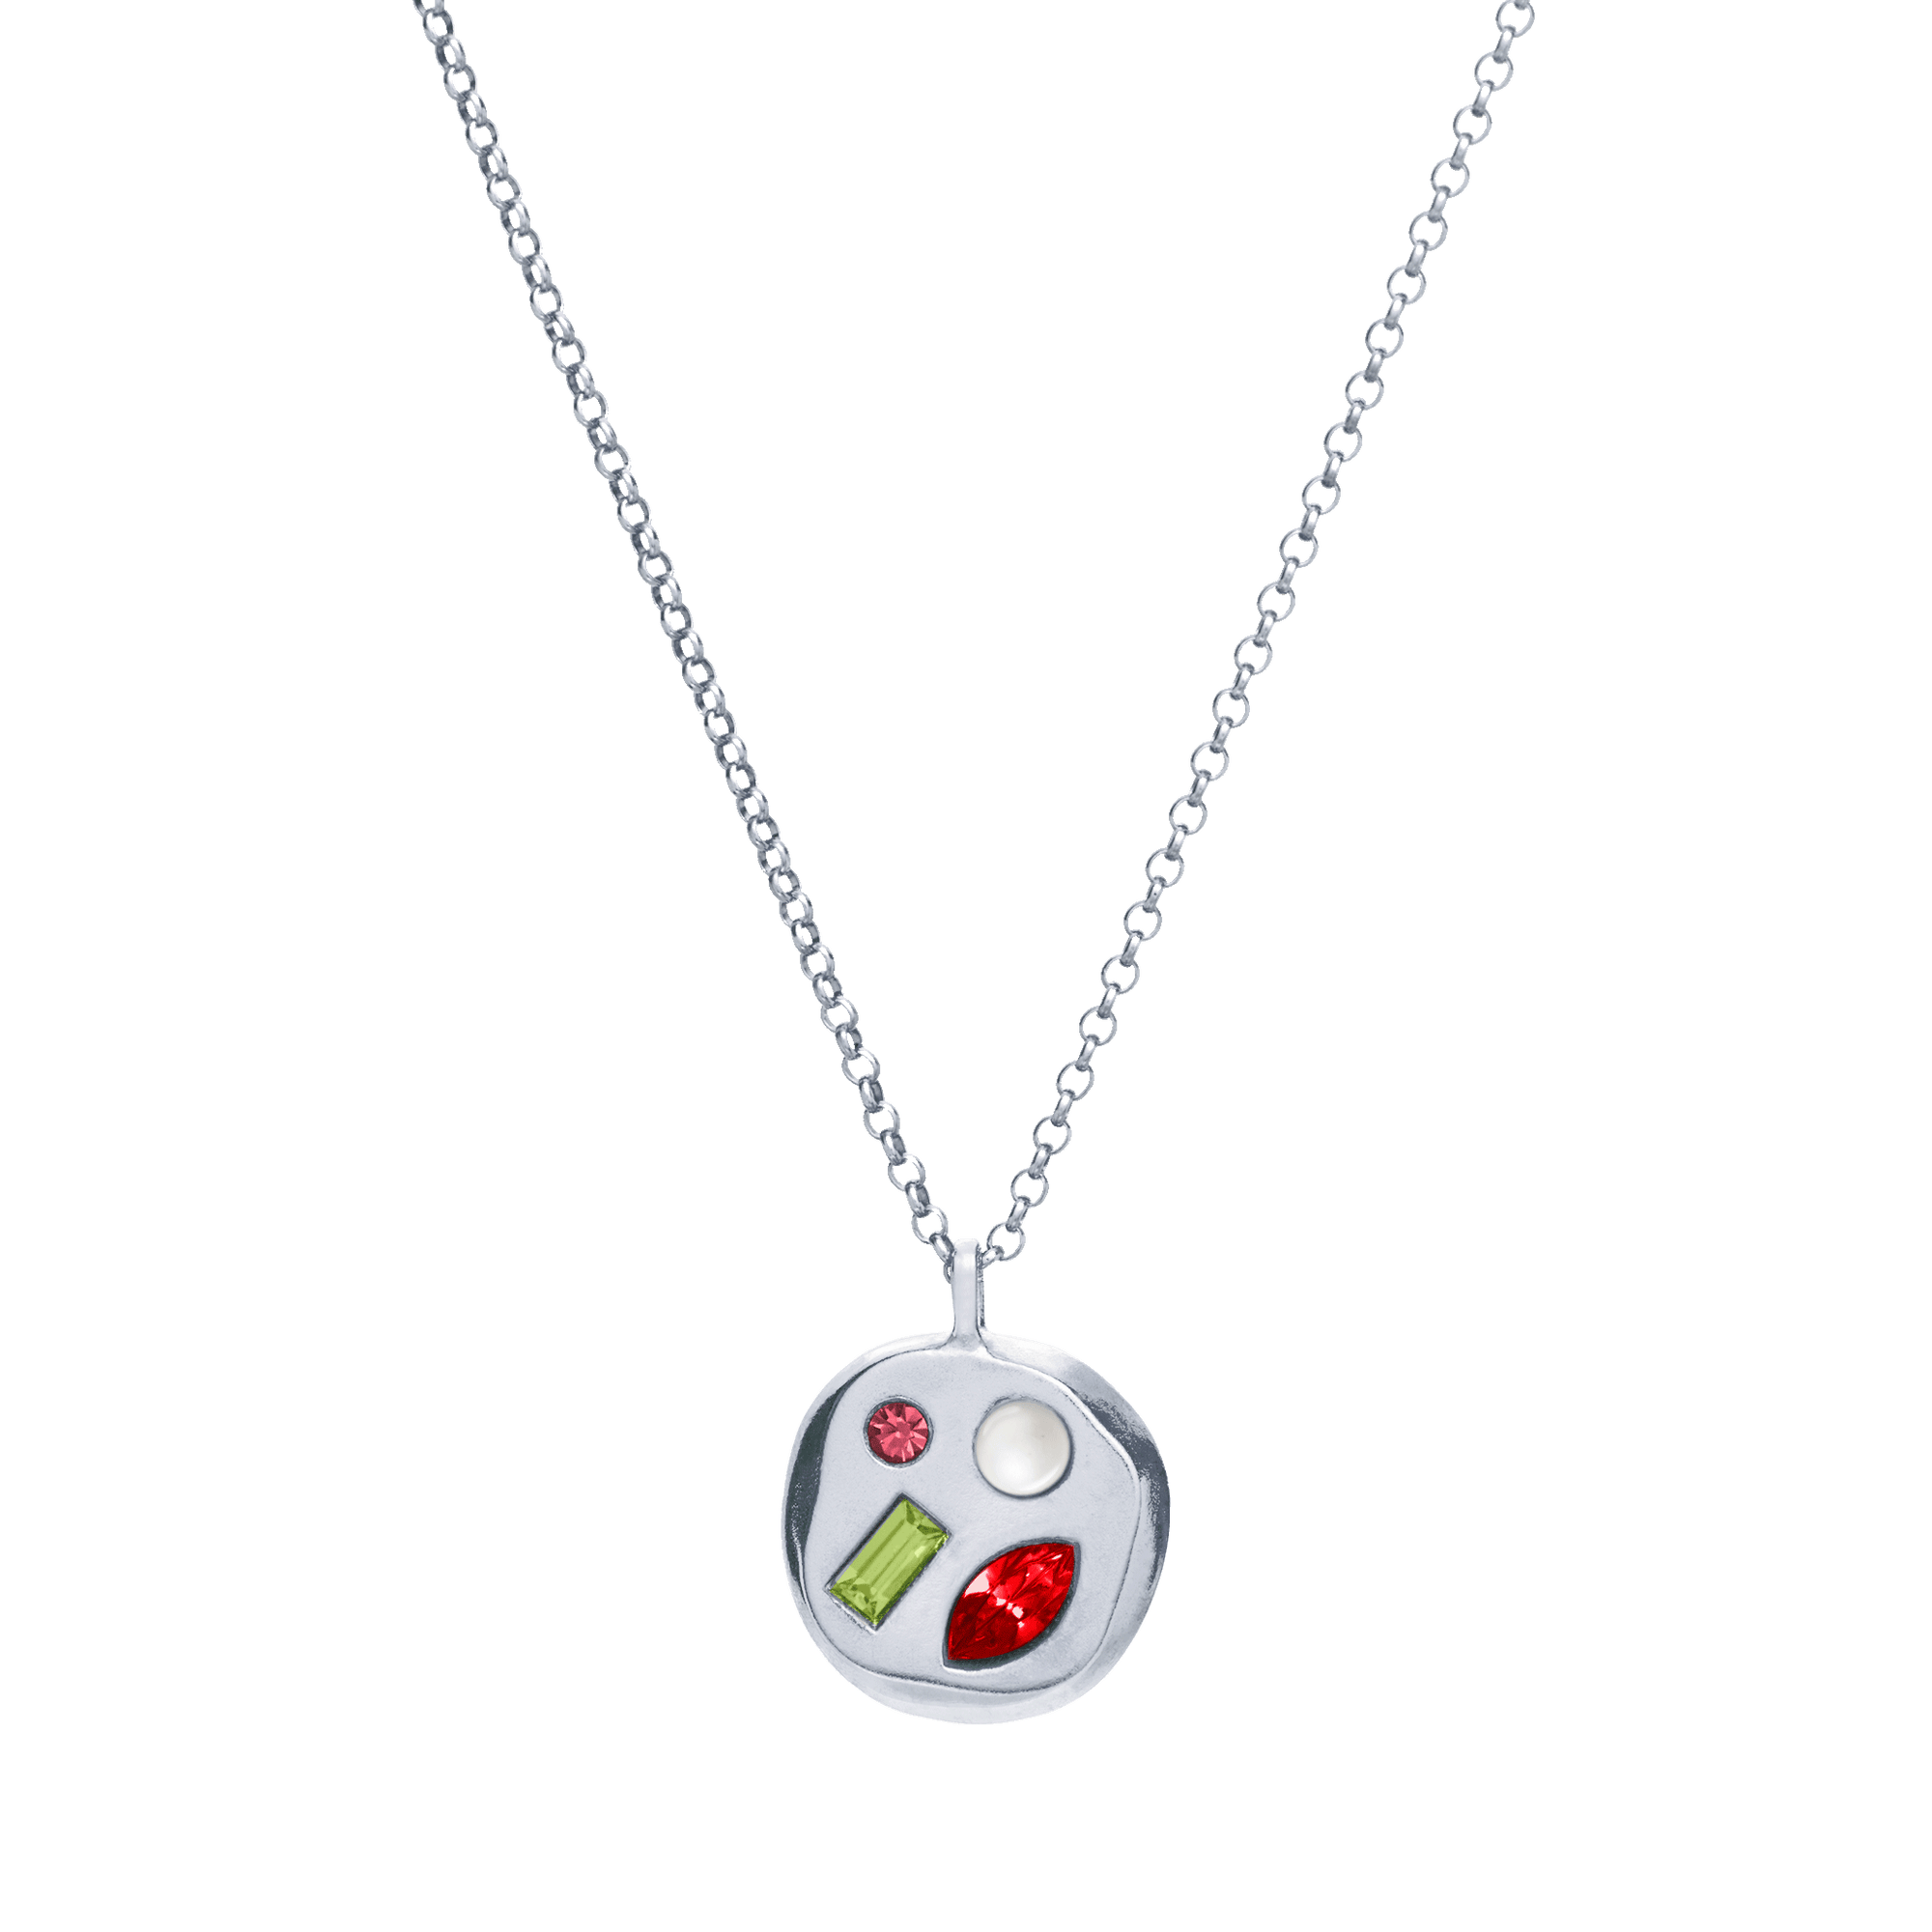 The January Twelfth Pendant in Sterling Silver